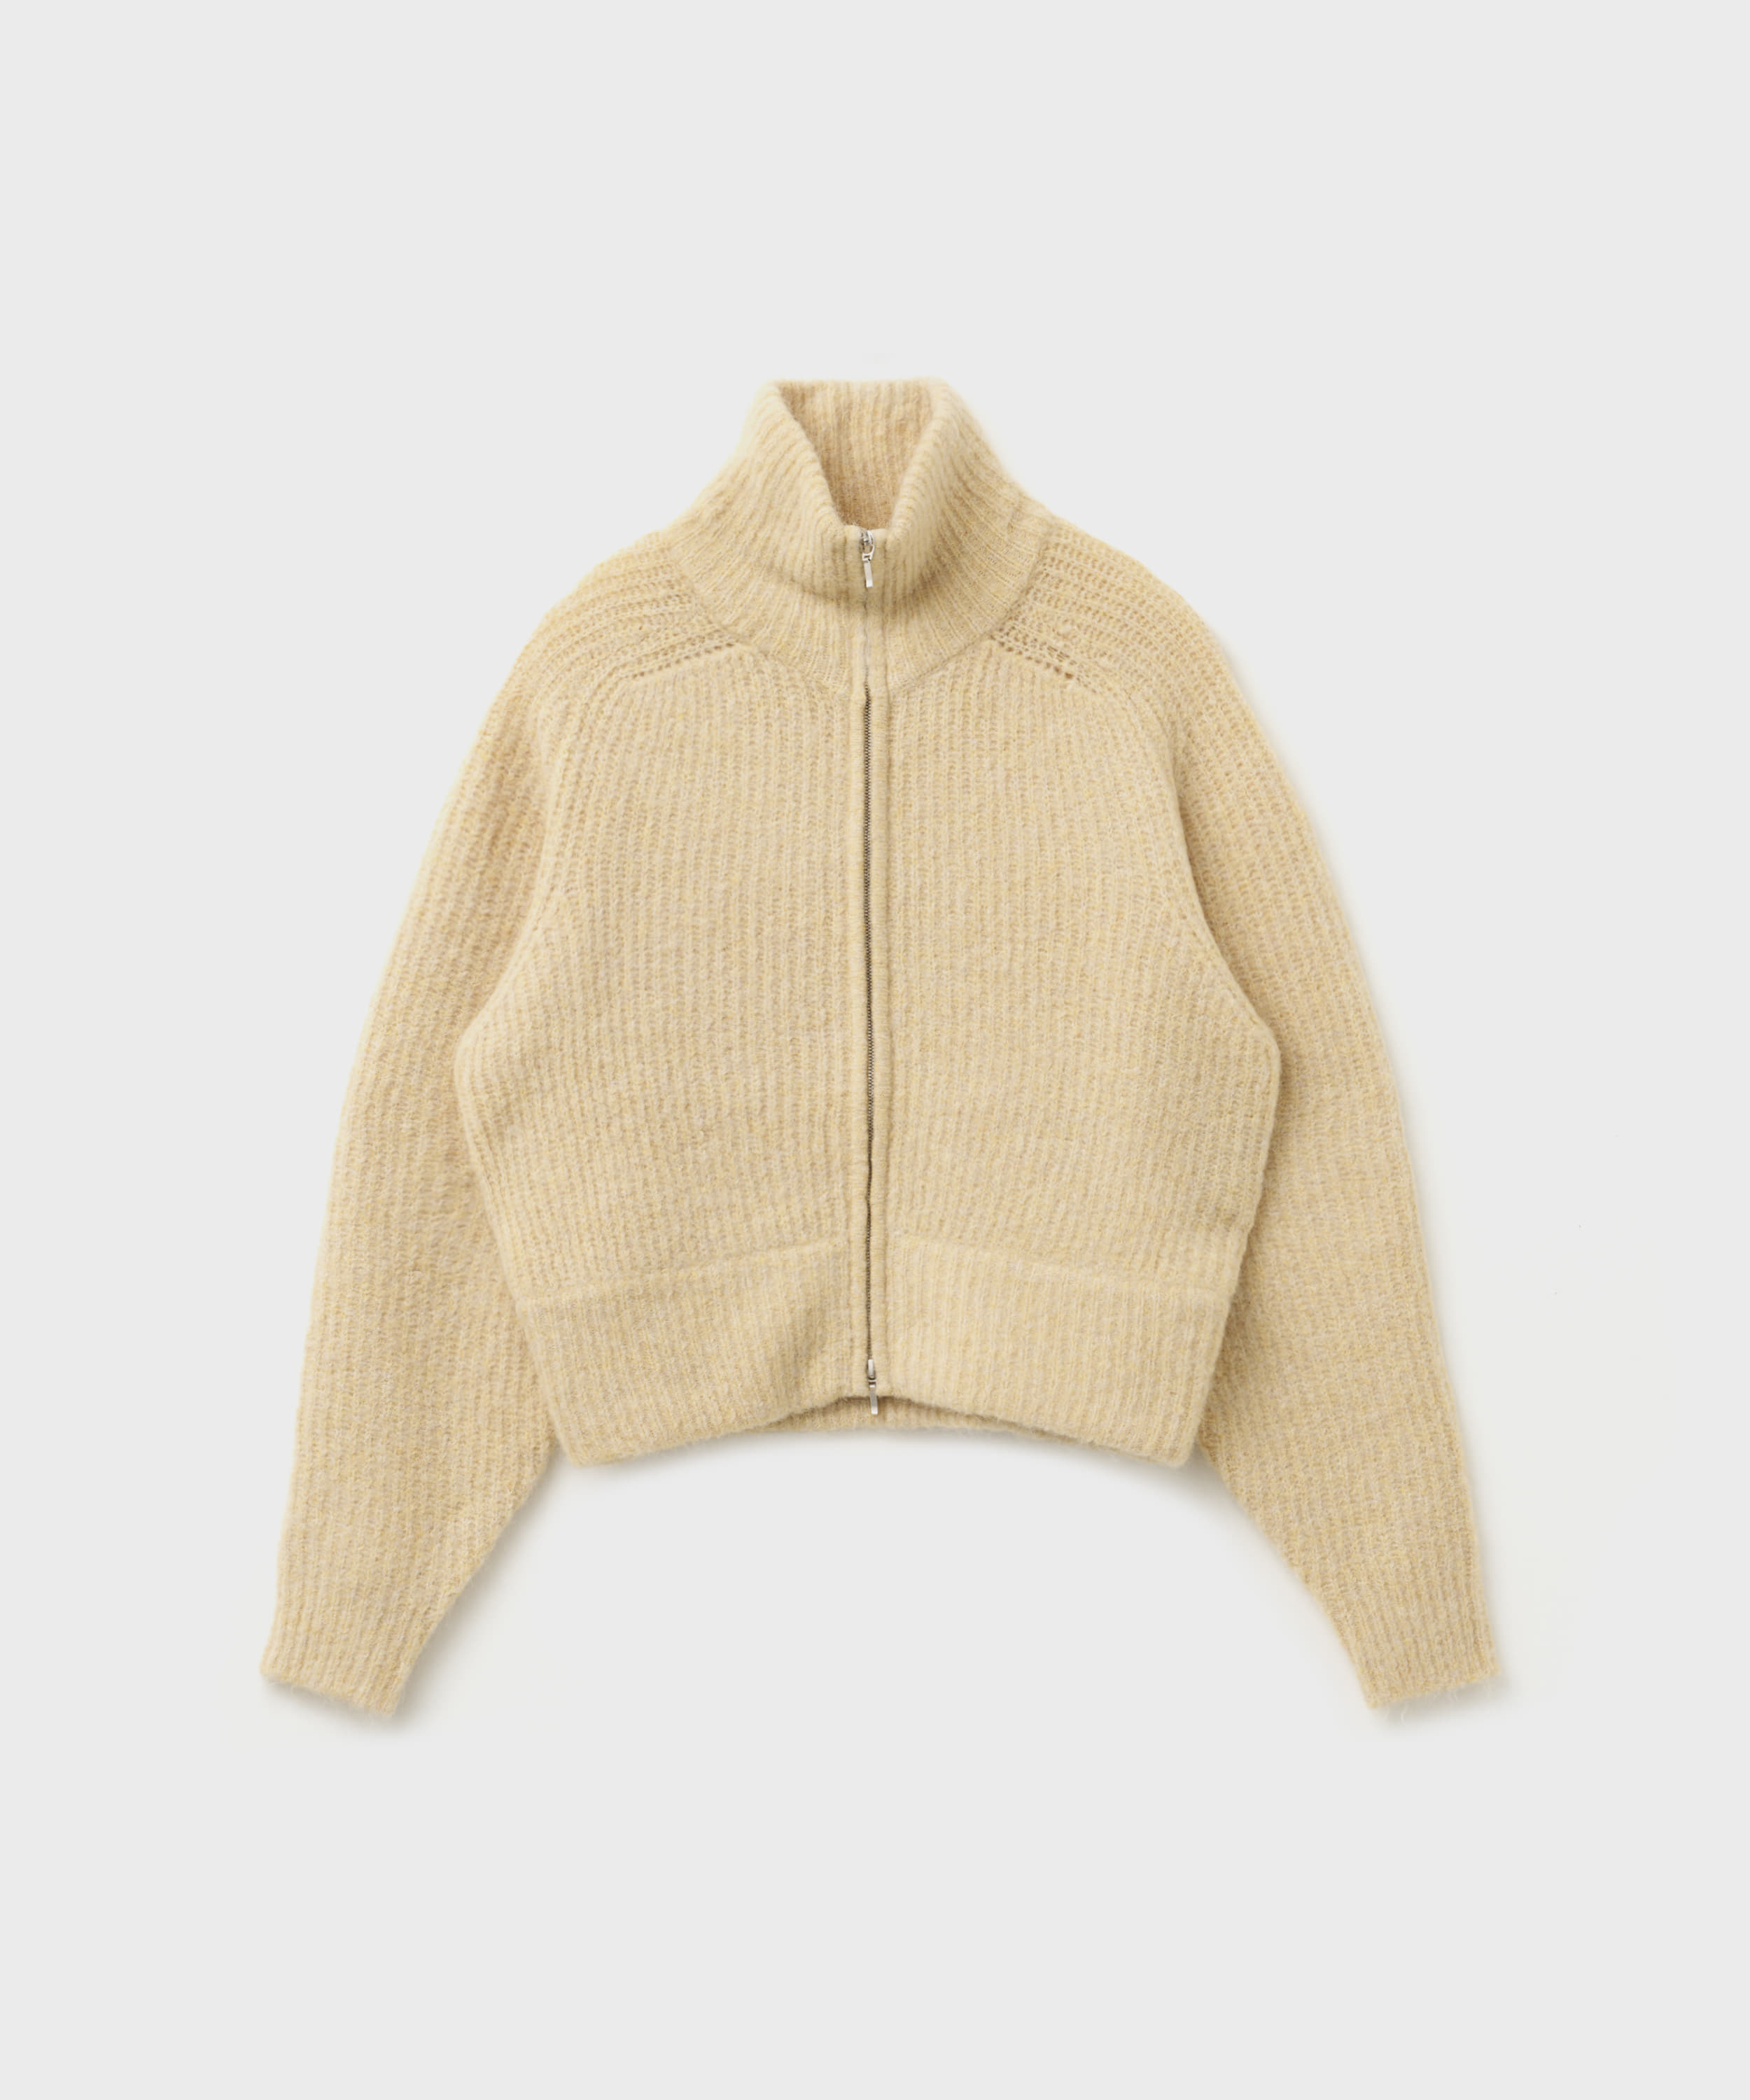 Cropped Drivers Knit (Yellow)